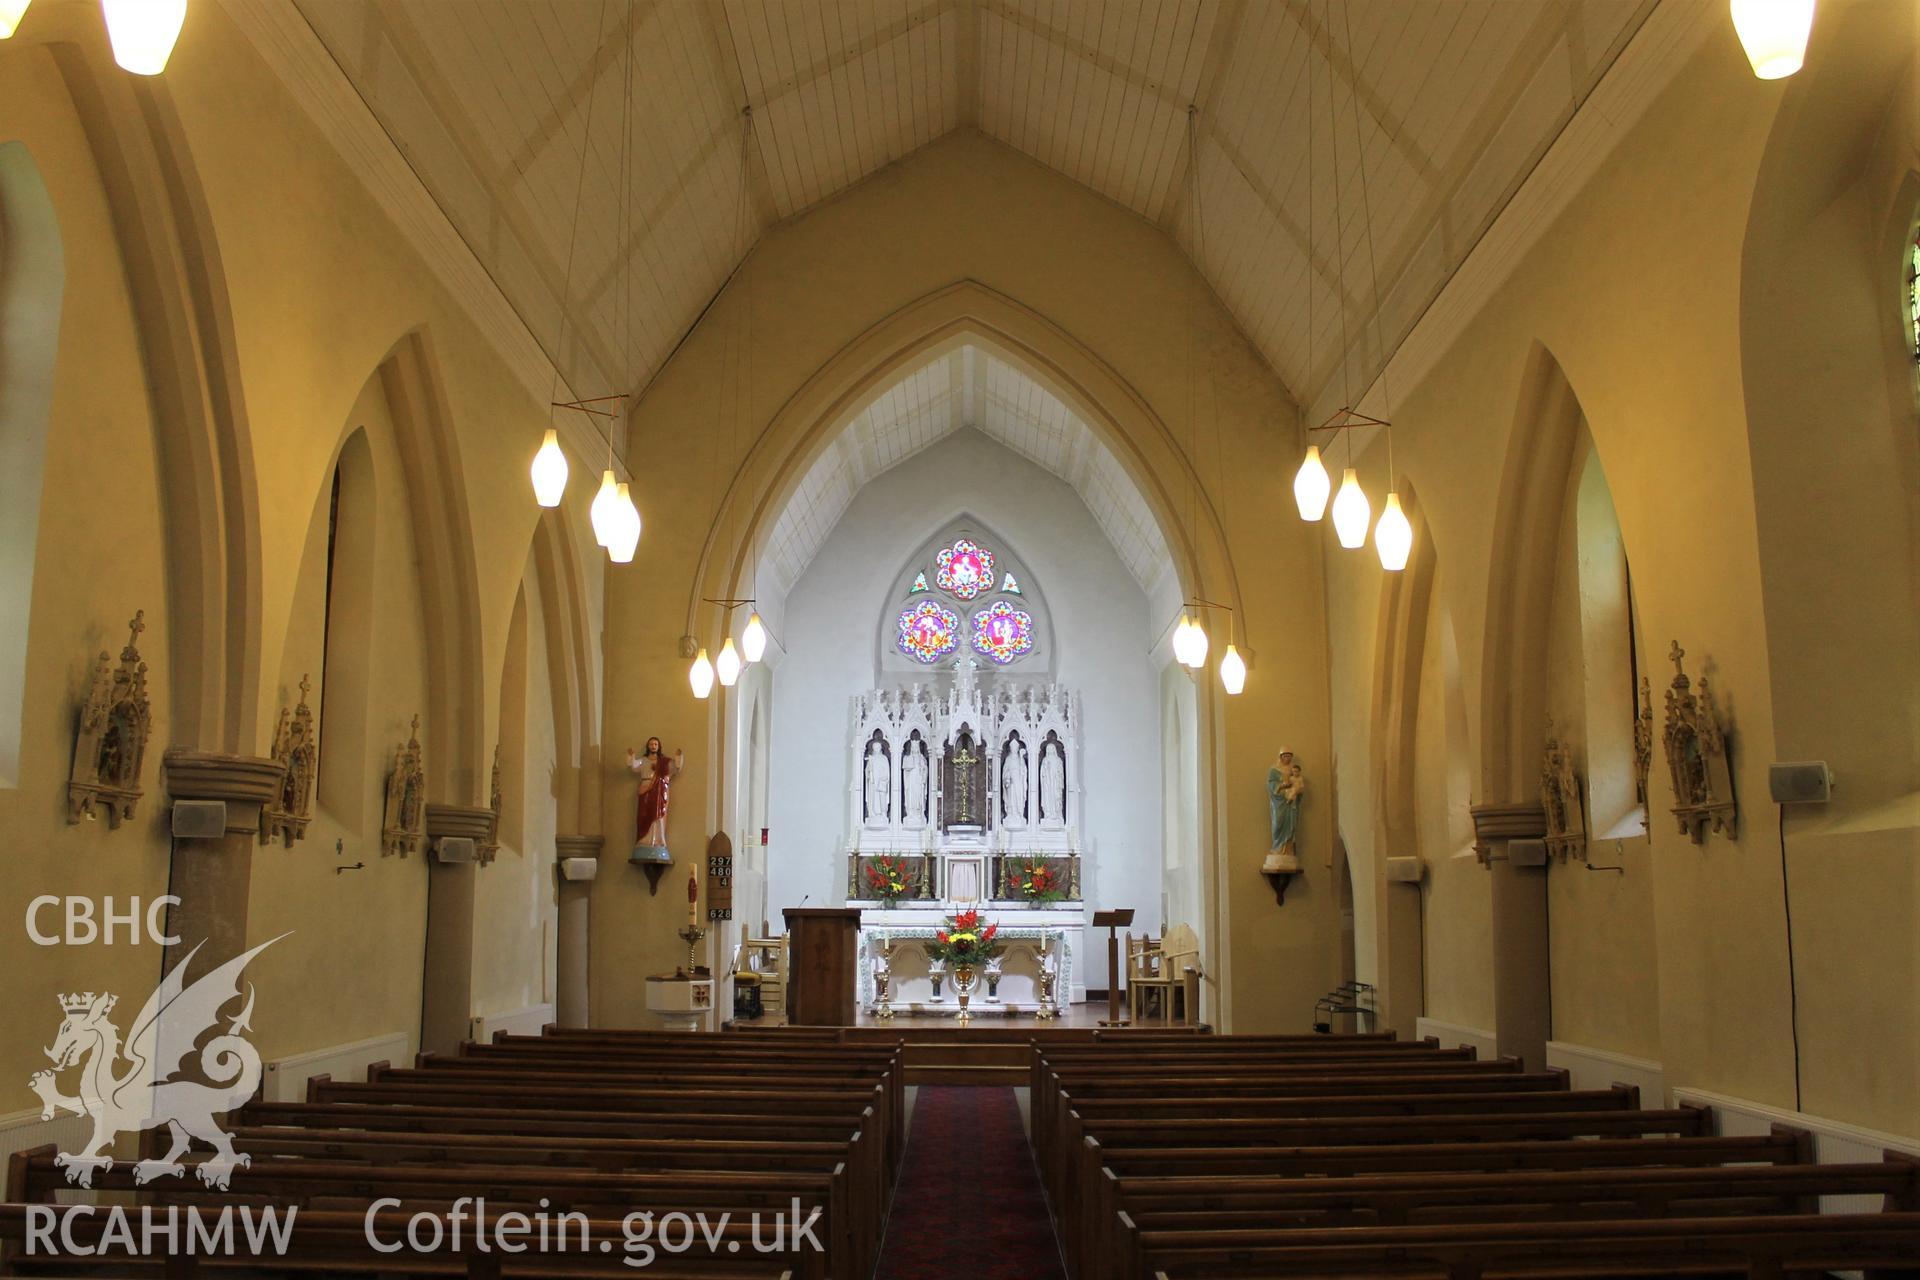 Digital colour photograph showing interior of St Mary's Catholic church, Carmarthen.